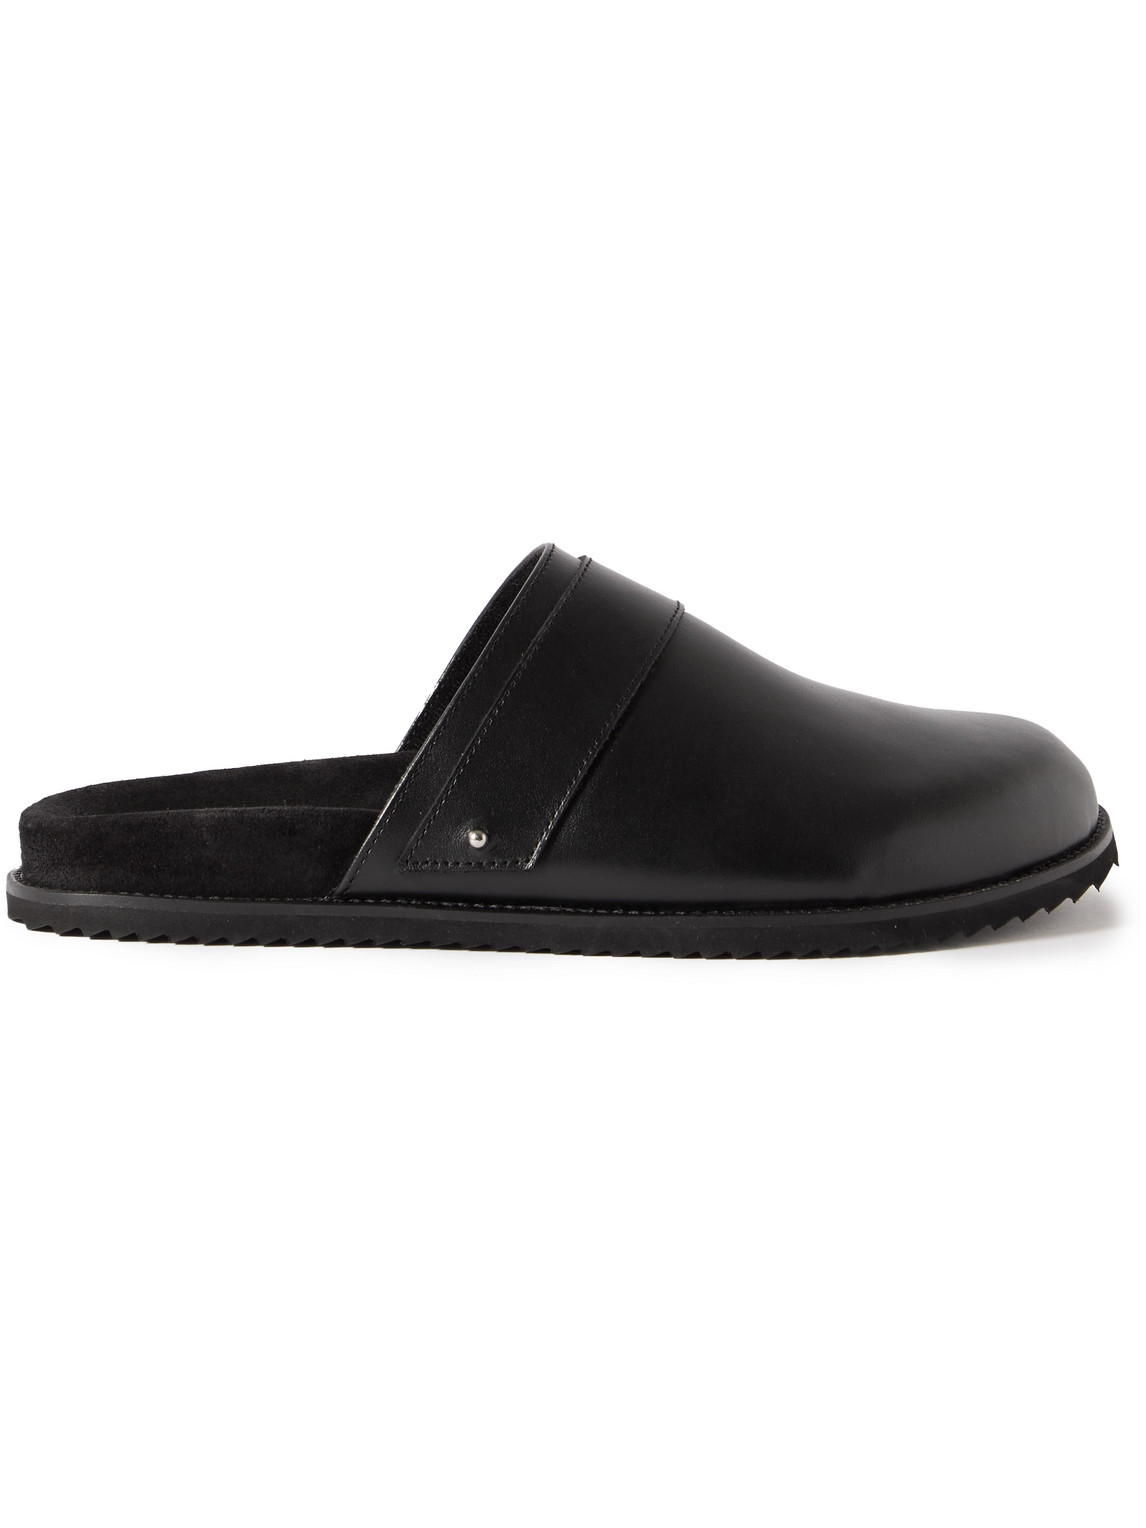 Mr P Leather Slippers In Black